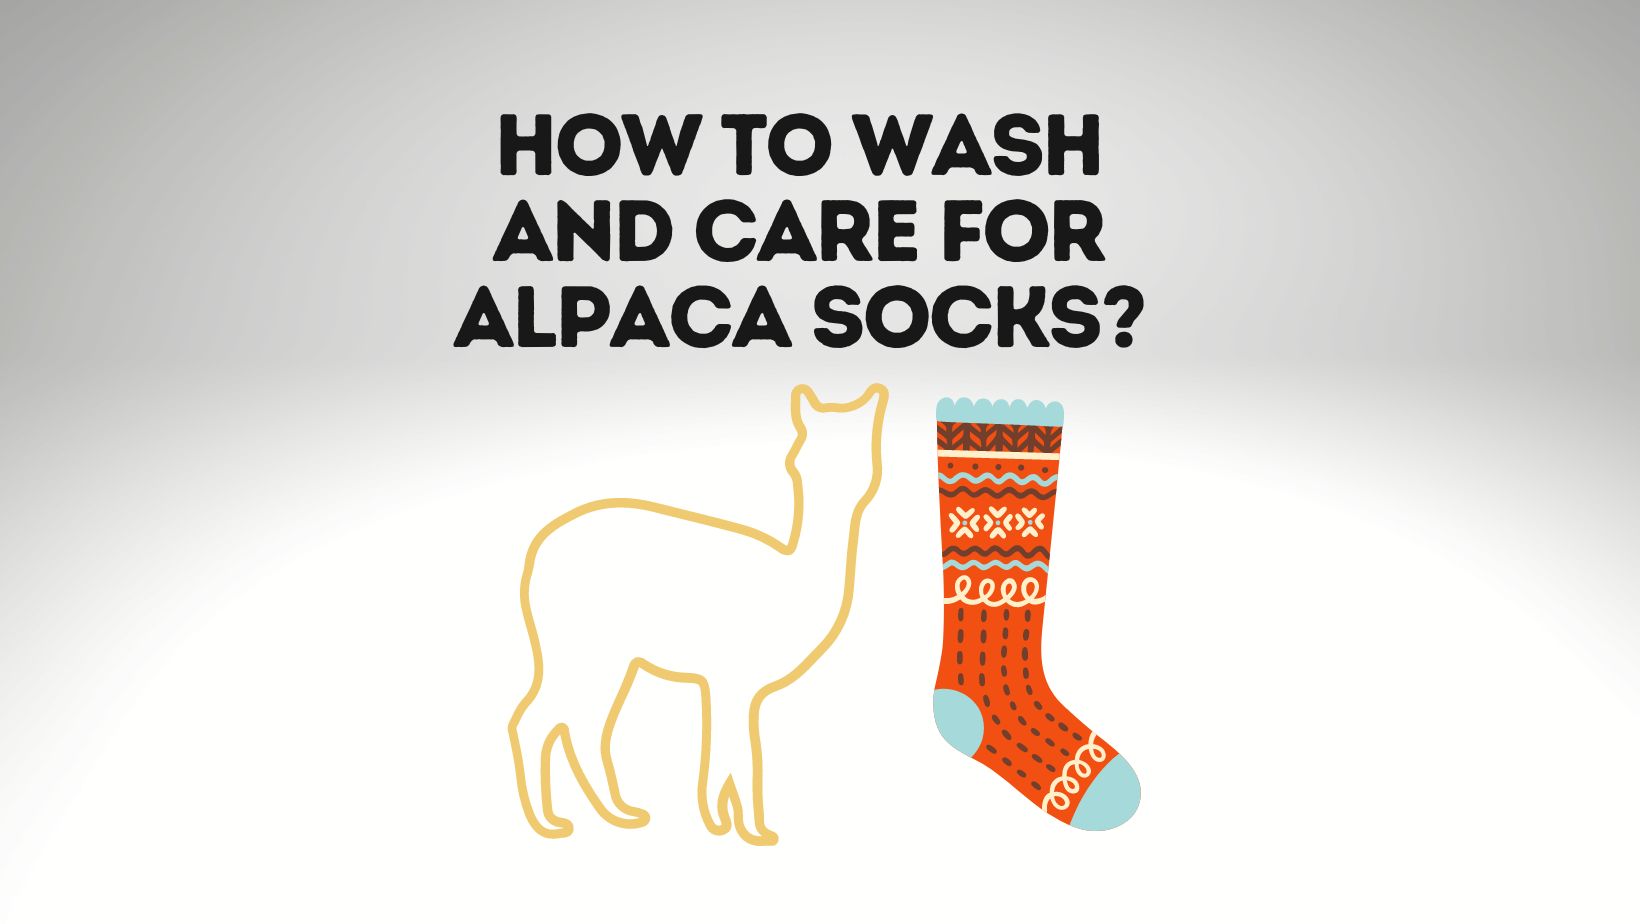 How To Wash And Care For Alpaca Socks